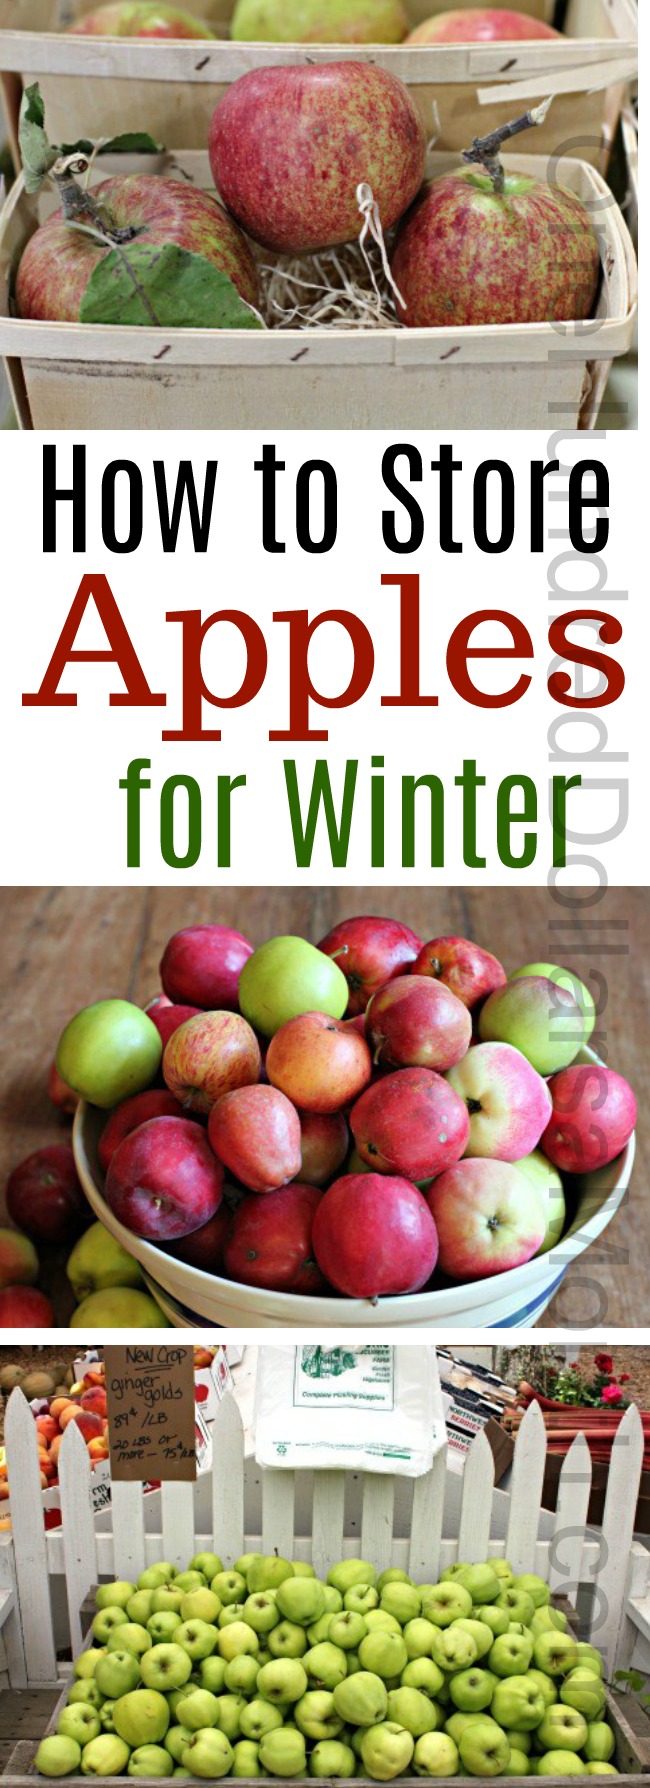 How to Store Apples for Winter